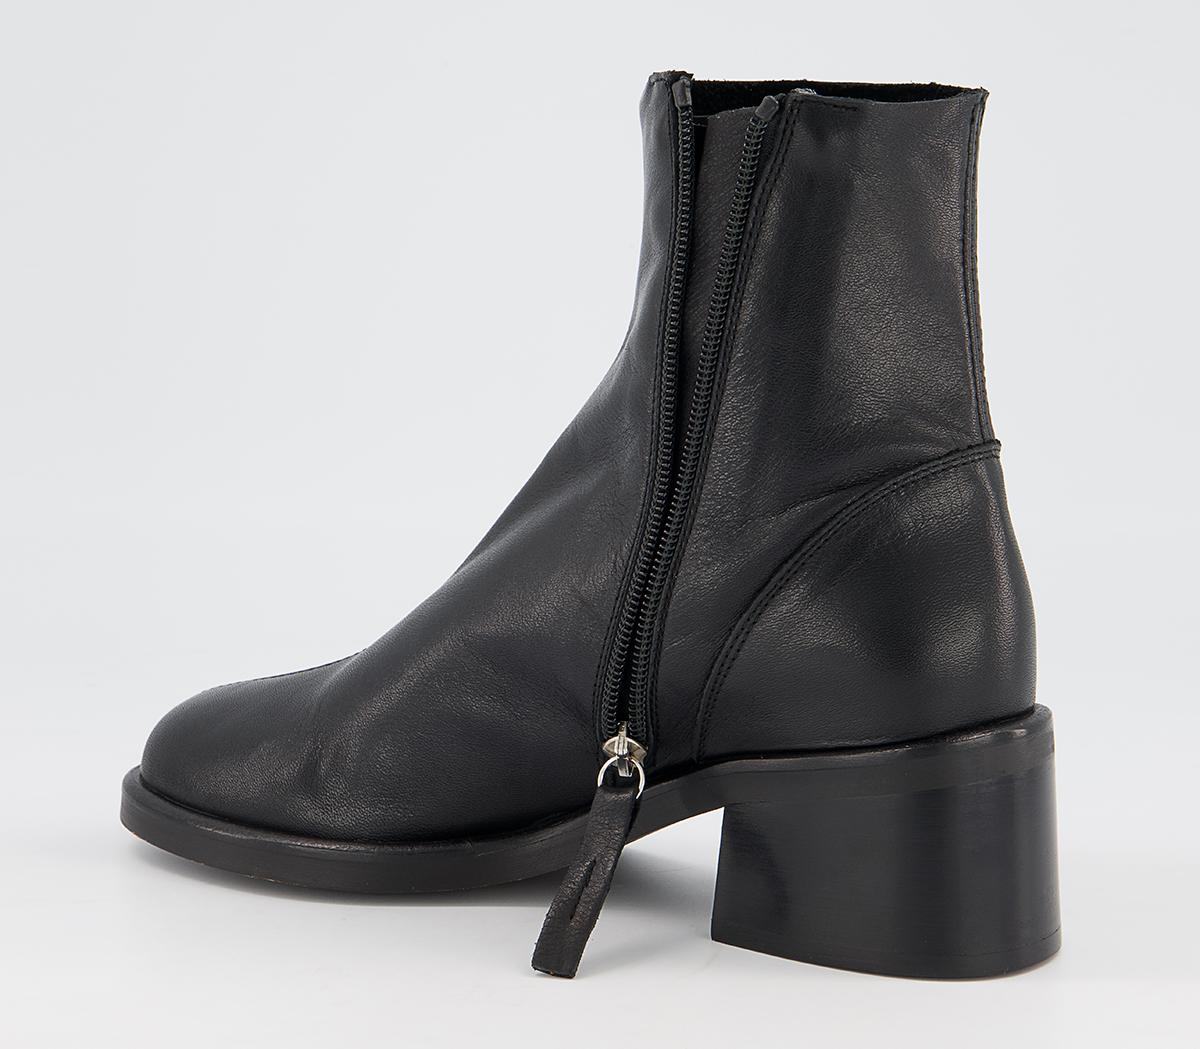 OFFICE Alicante Chunky Clean Boots Black Leather - Women's Ankle Boots